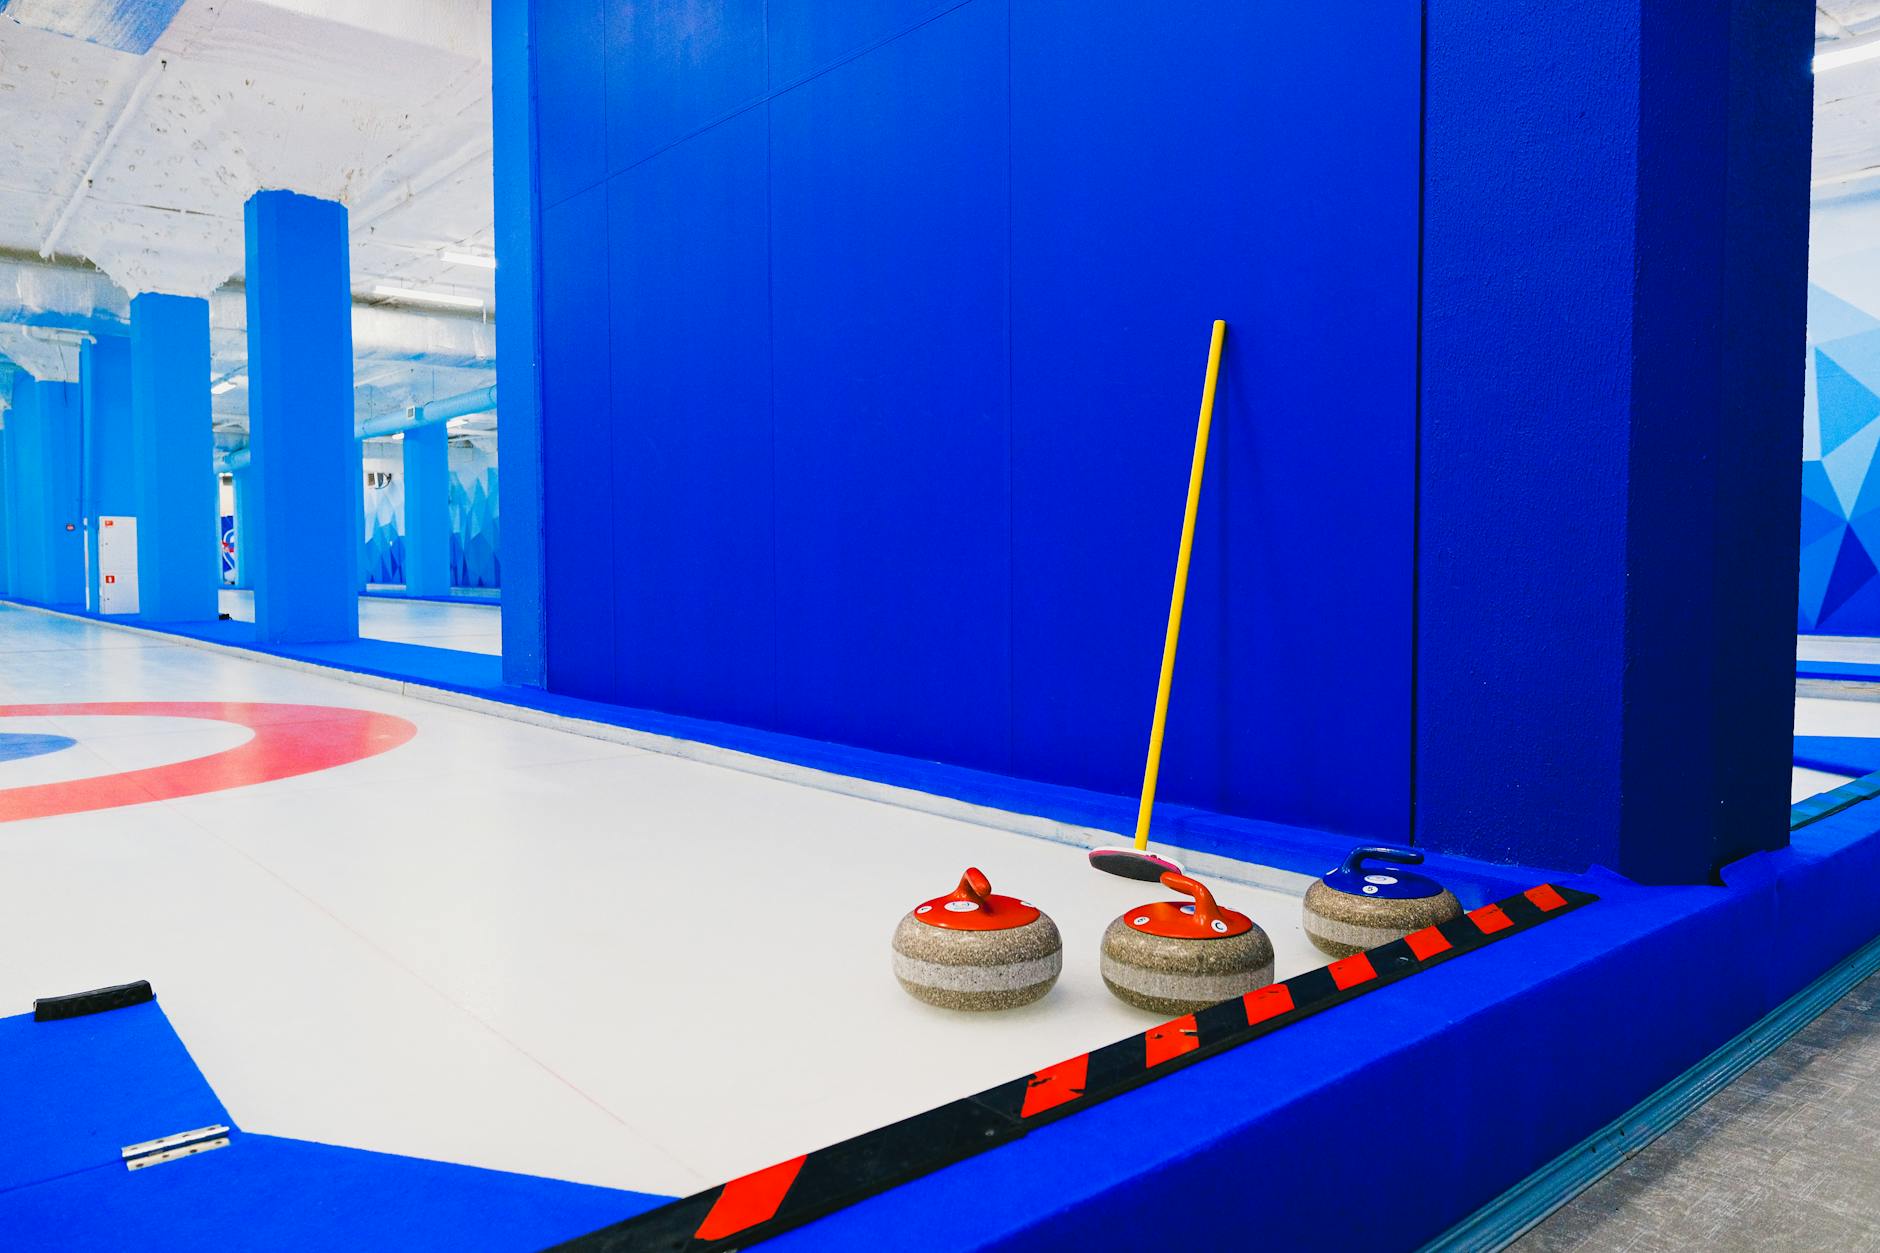 Curling stones and broom near wall